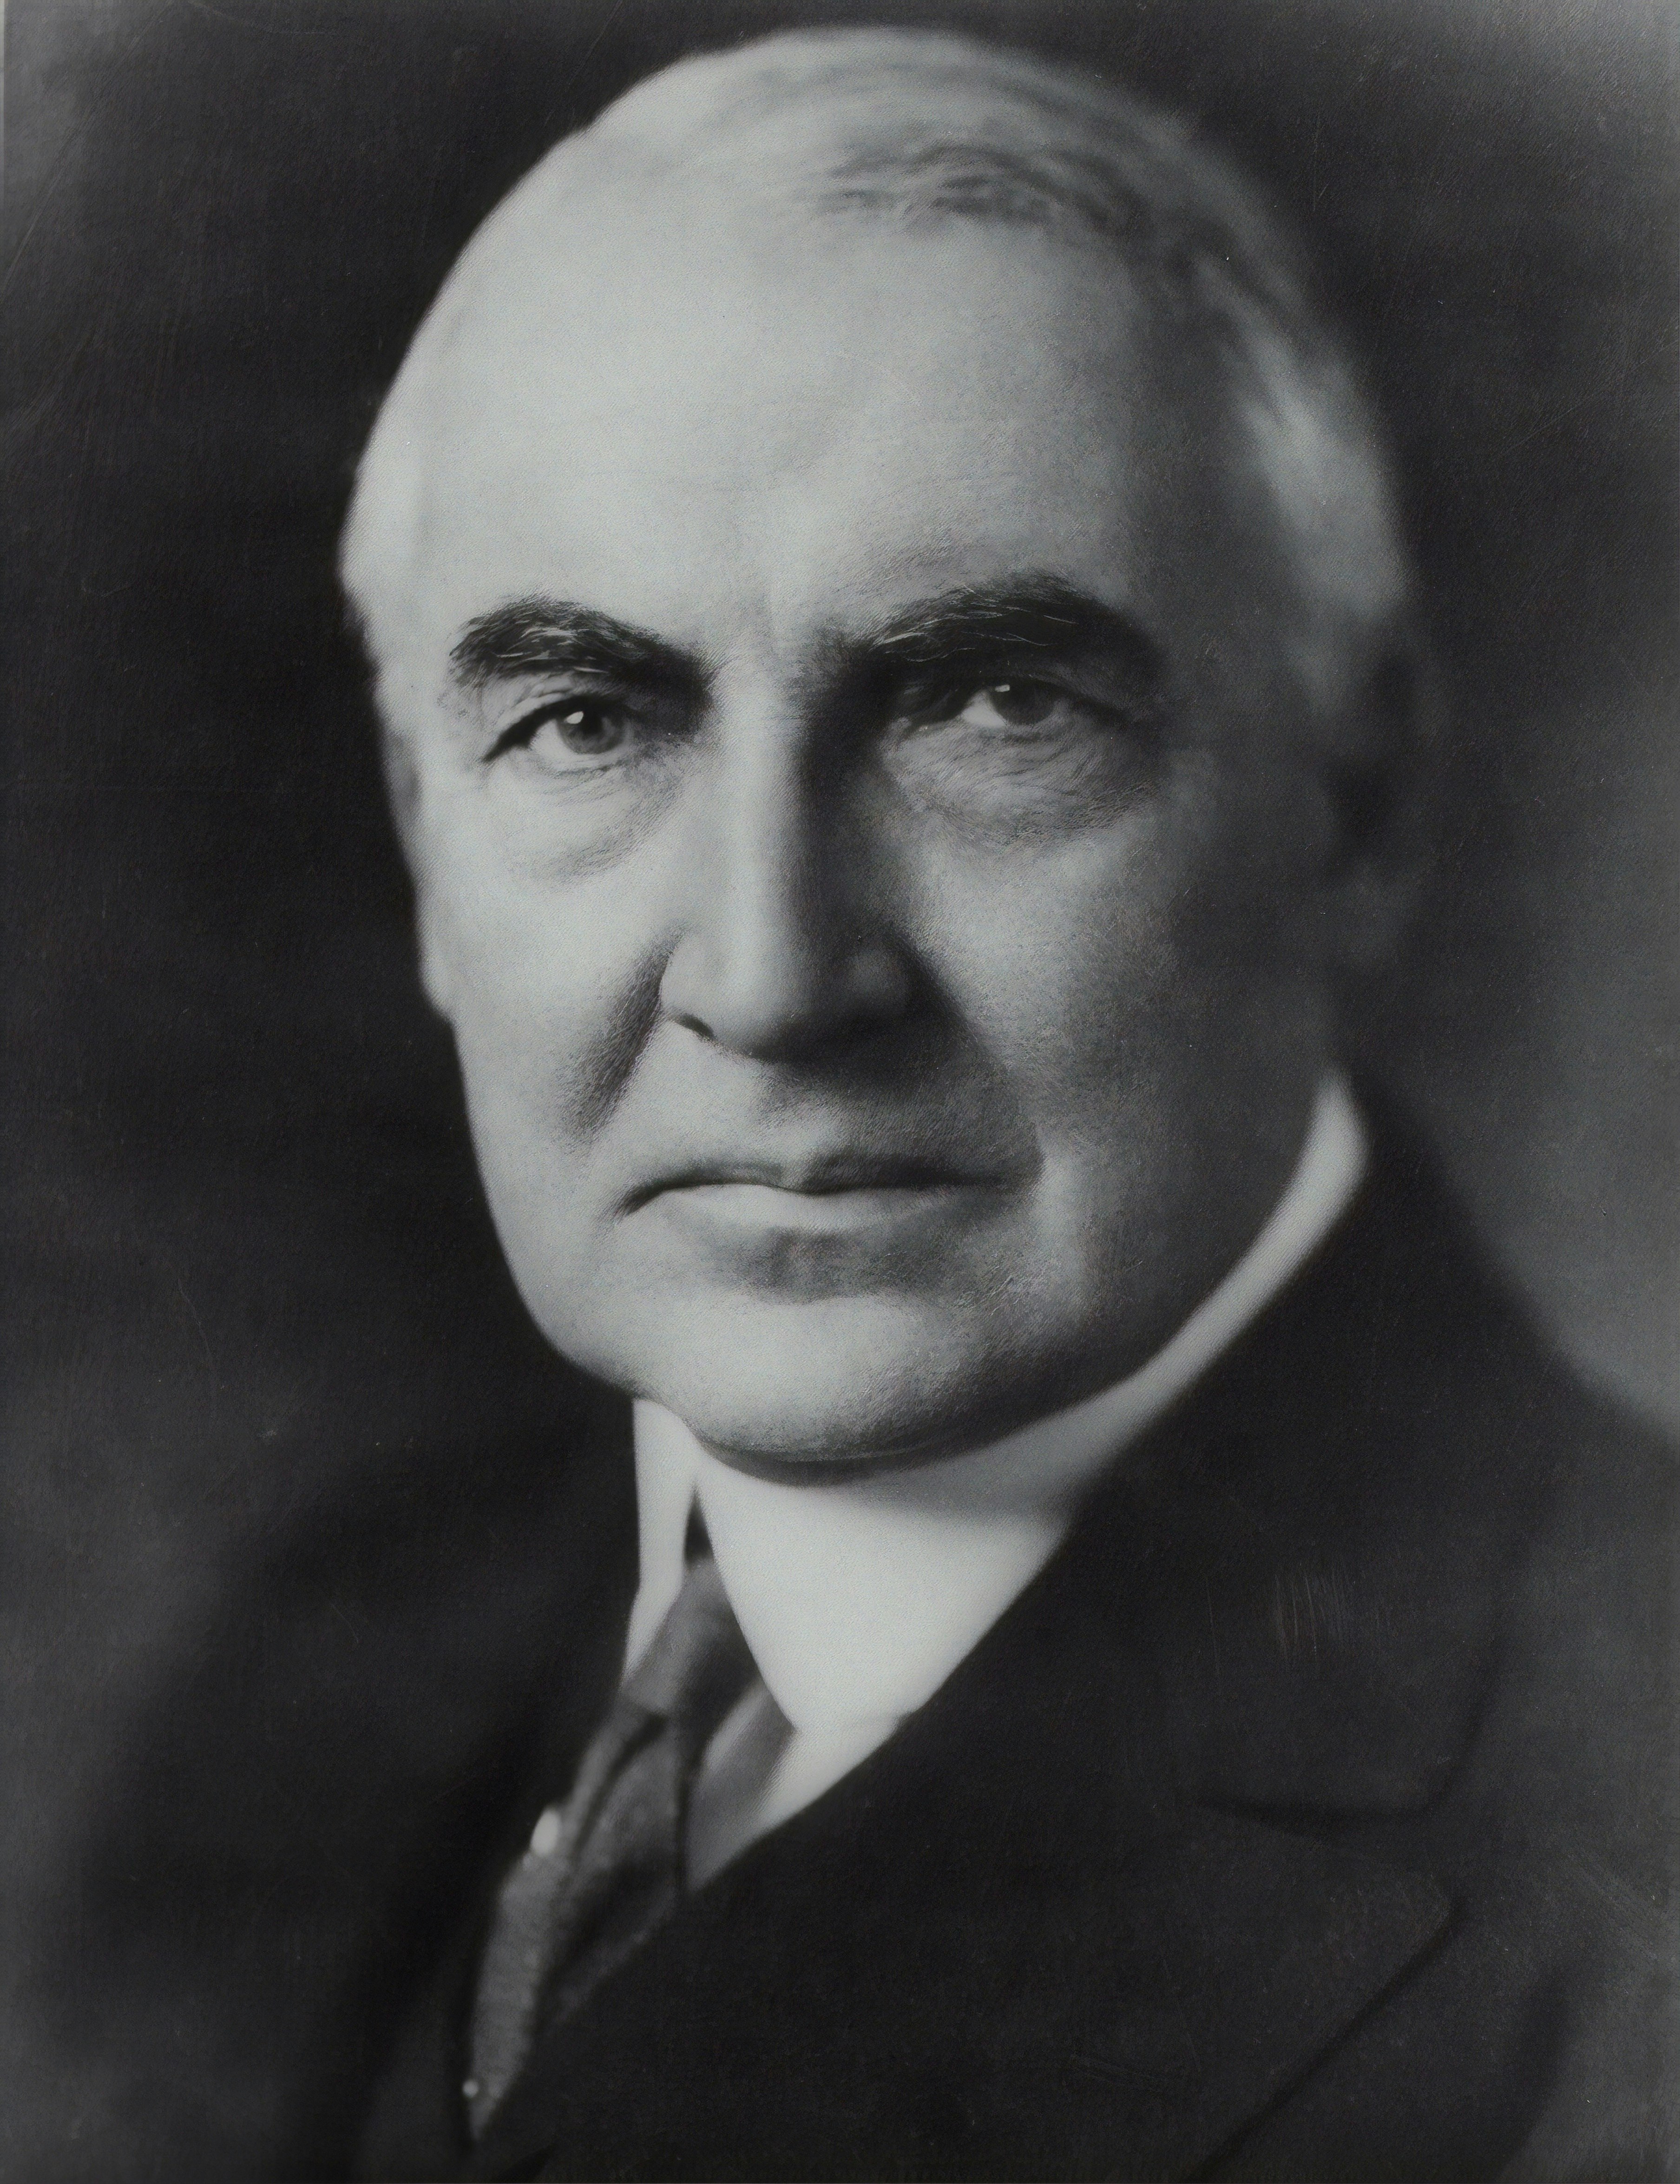 [Senator Warren G. Harding, head-and-shoulders portrait, facing front]. Photograph from the Presidential File Collection, ca. 1920. Library of Congress Prints & Photographs Division.

https://www.loc.gov/item/96522644/

